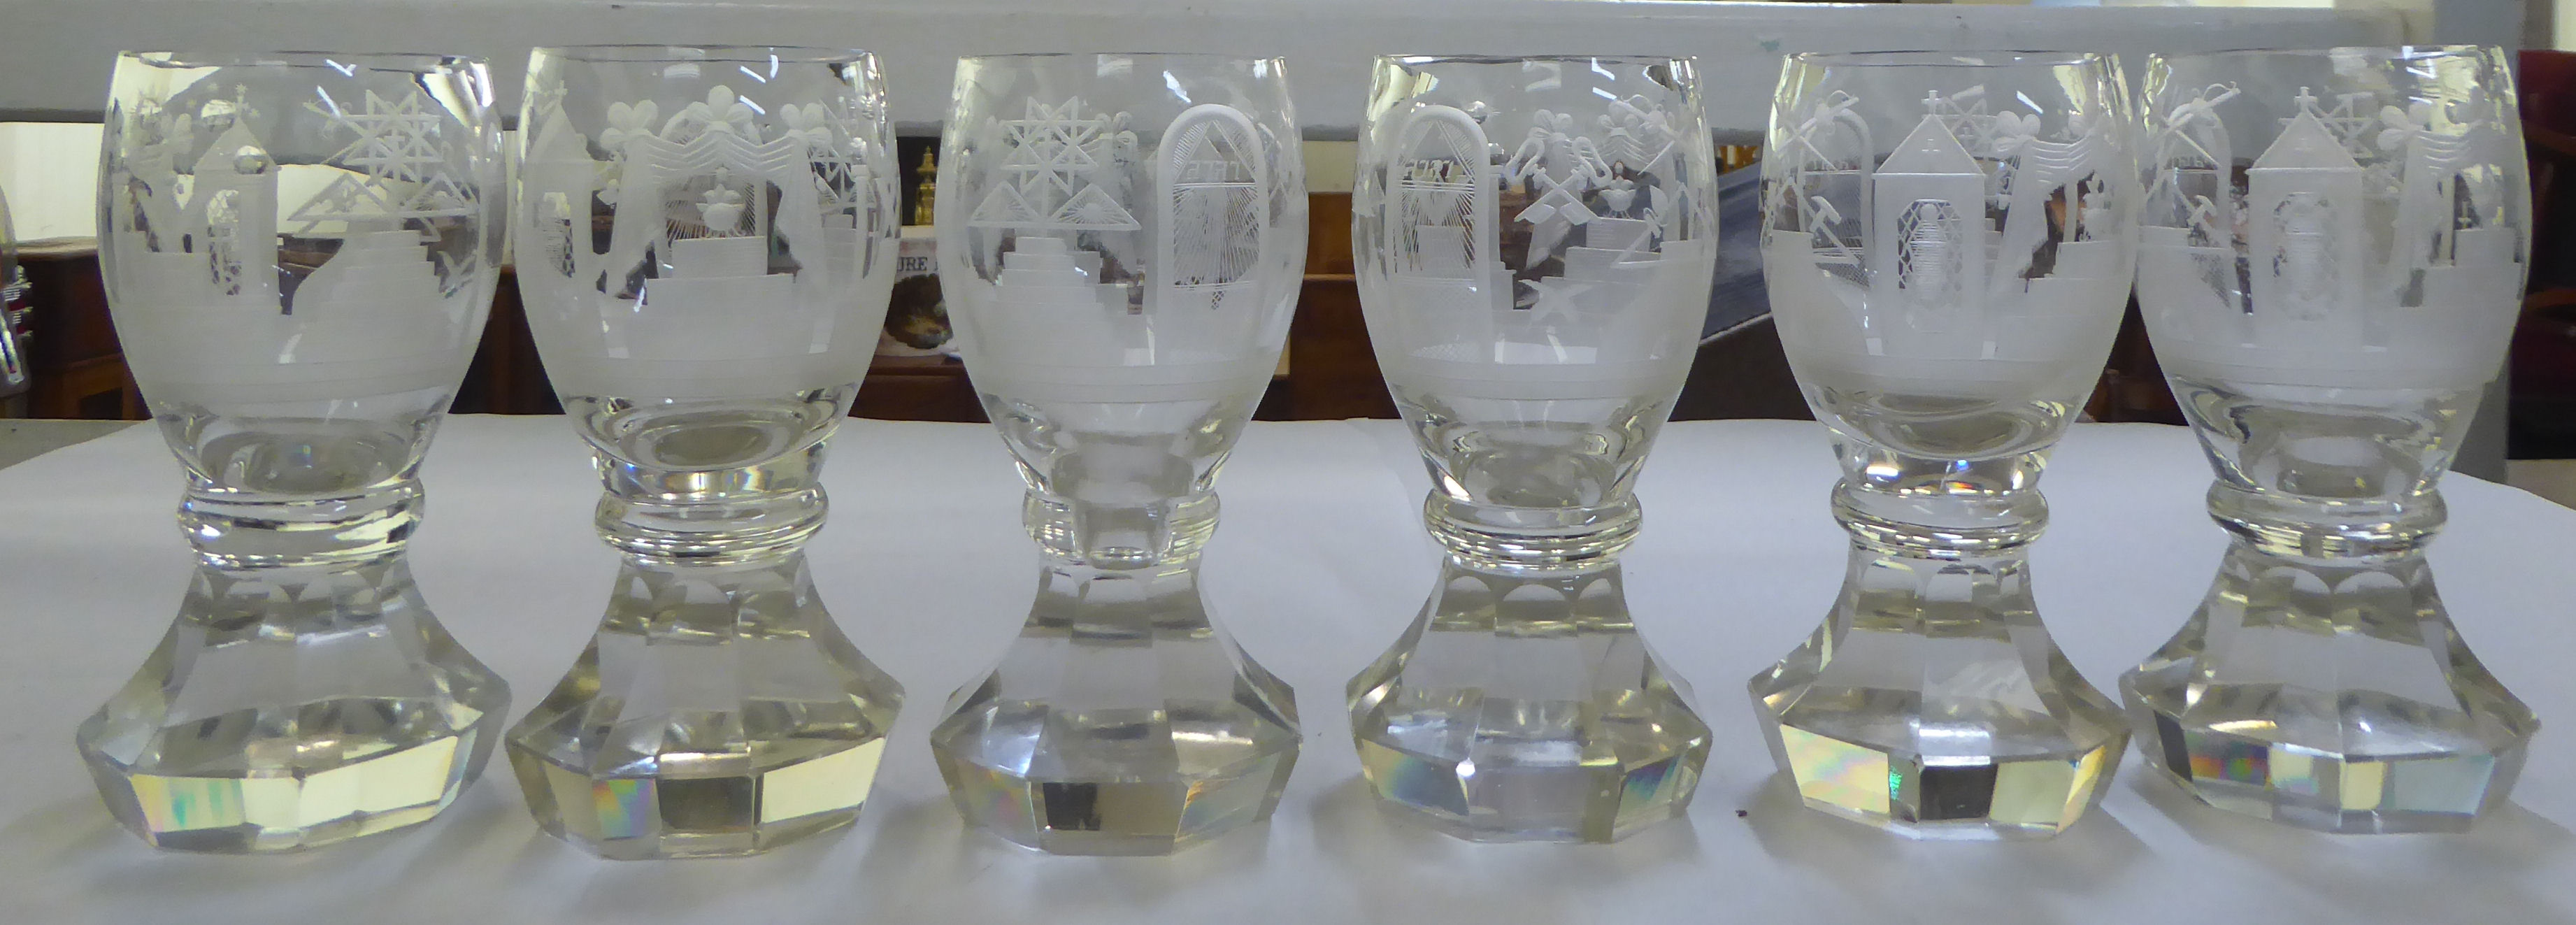 A set of six clear glass tumblers engraved with Masonic motifs and emblems  6"h